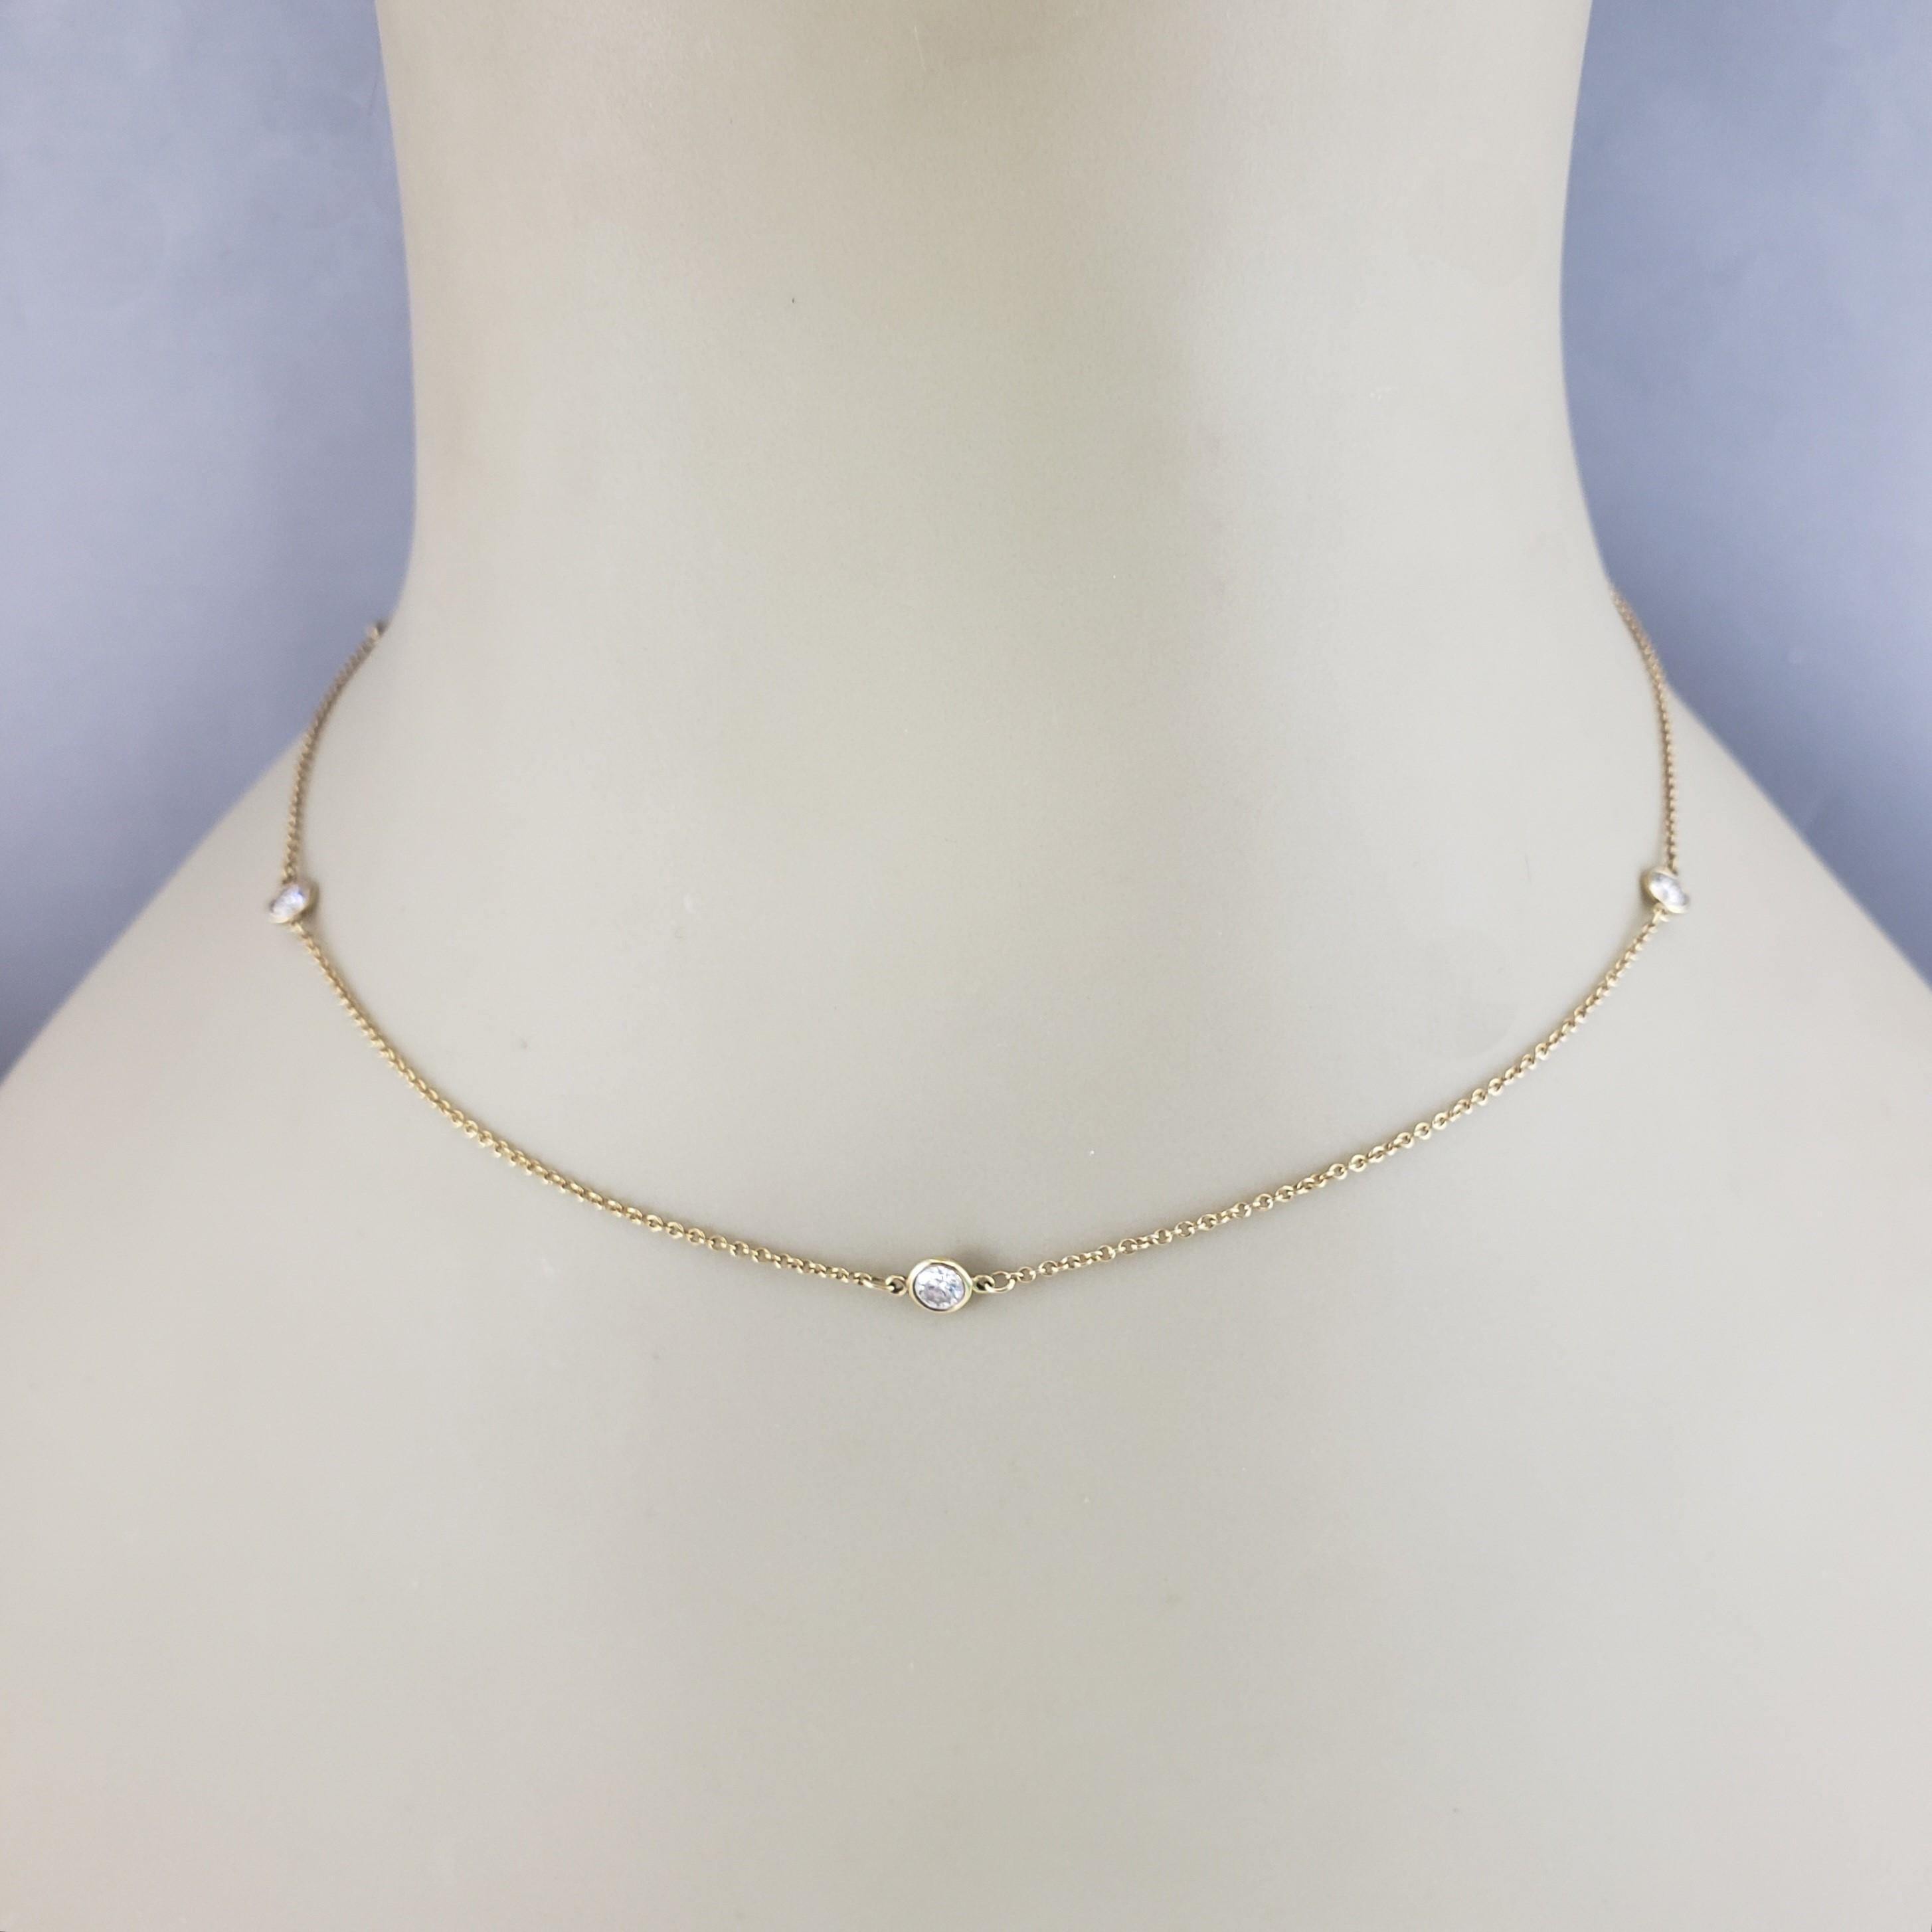 Tiffany & Co. Elsa Peretti 18K Yellow Gold Diamond By Yard Necklace #17056 For Sale 4